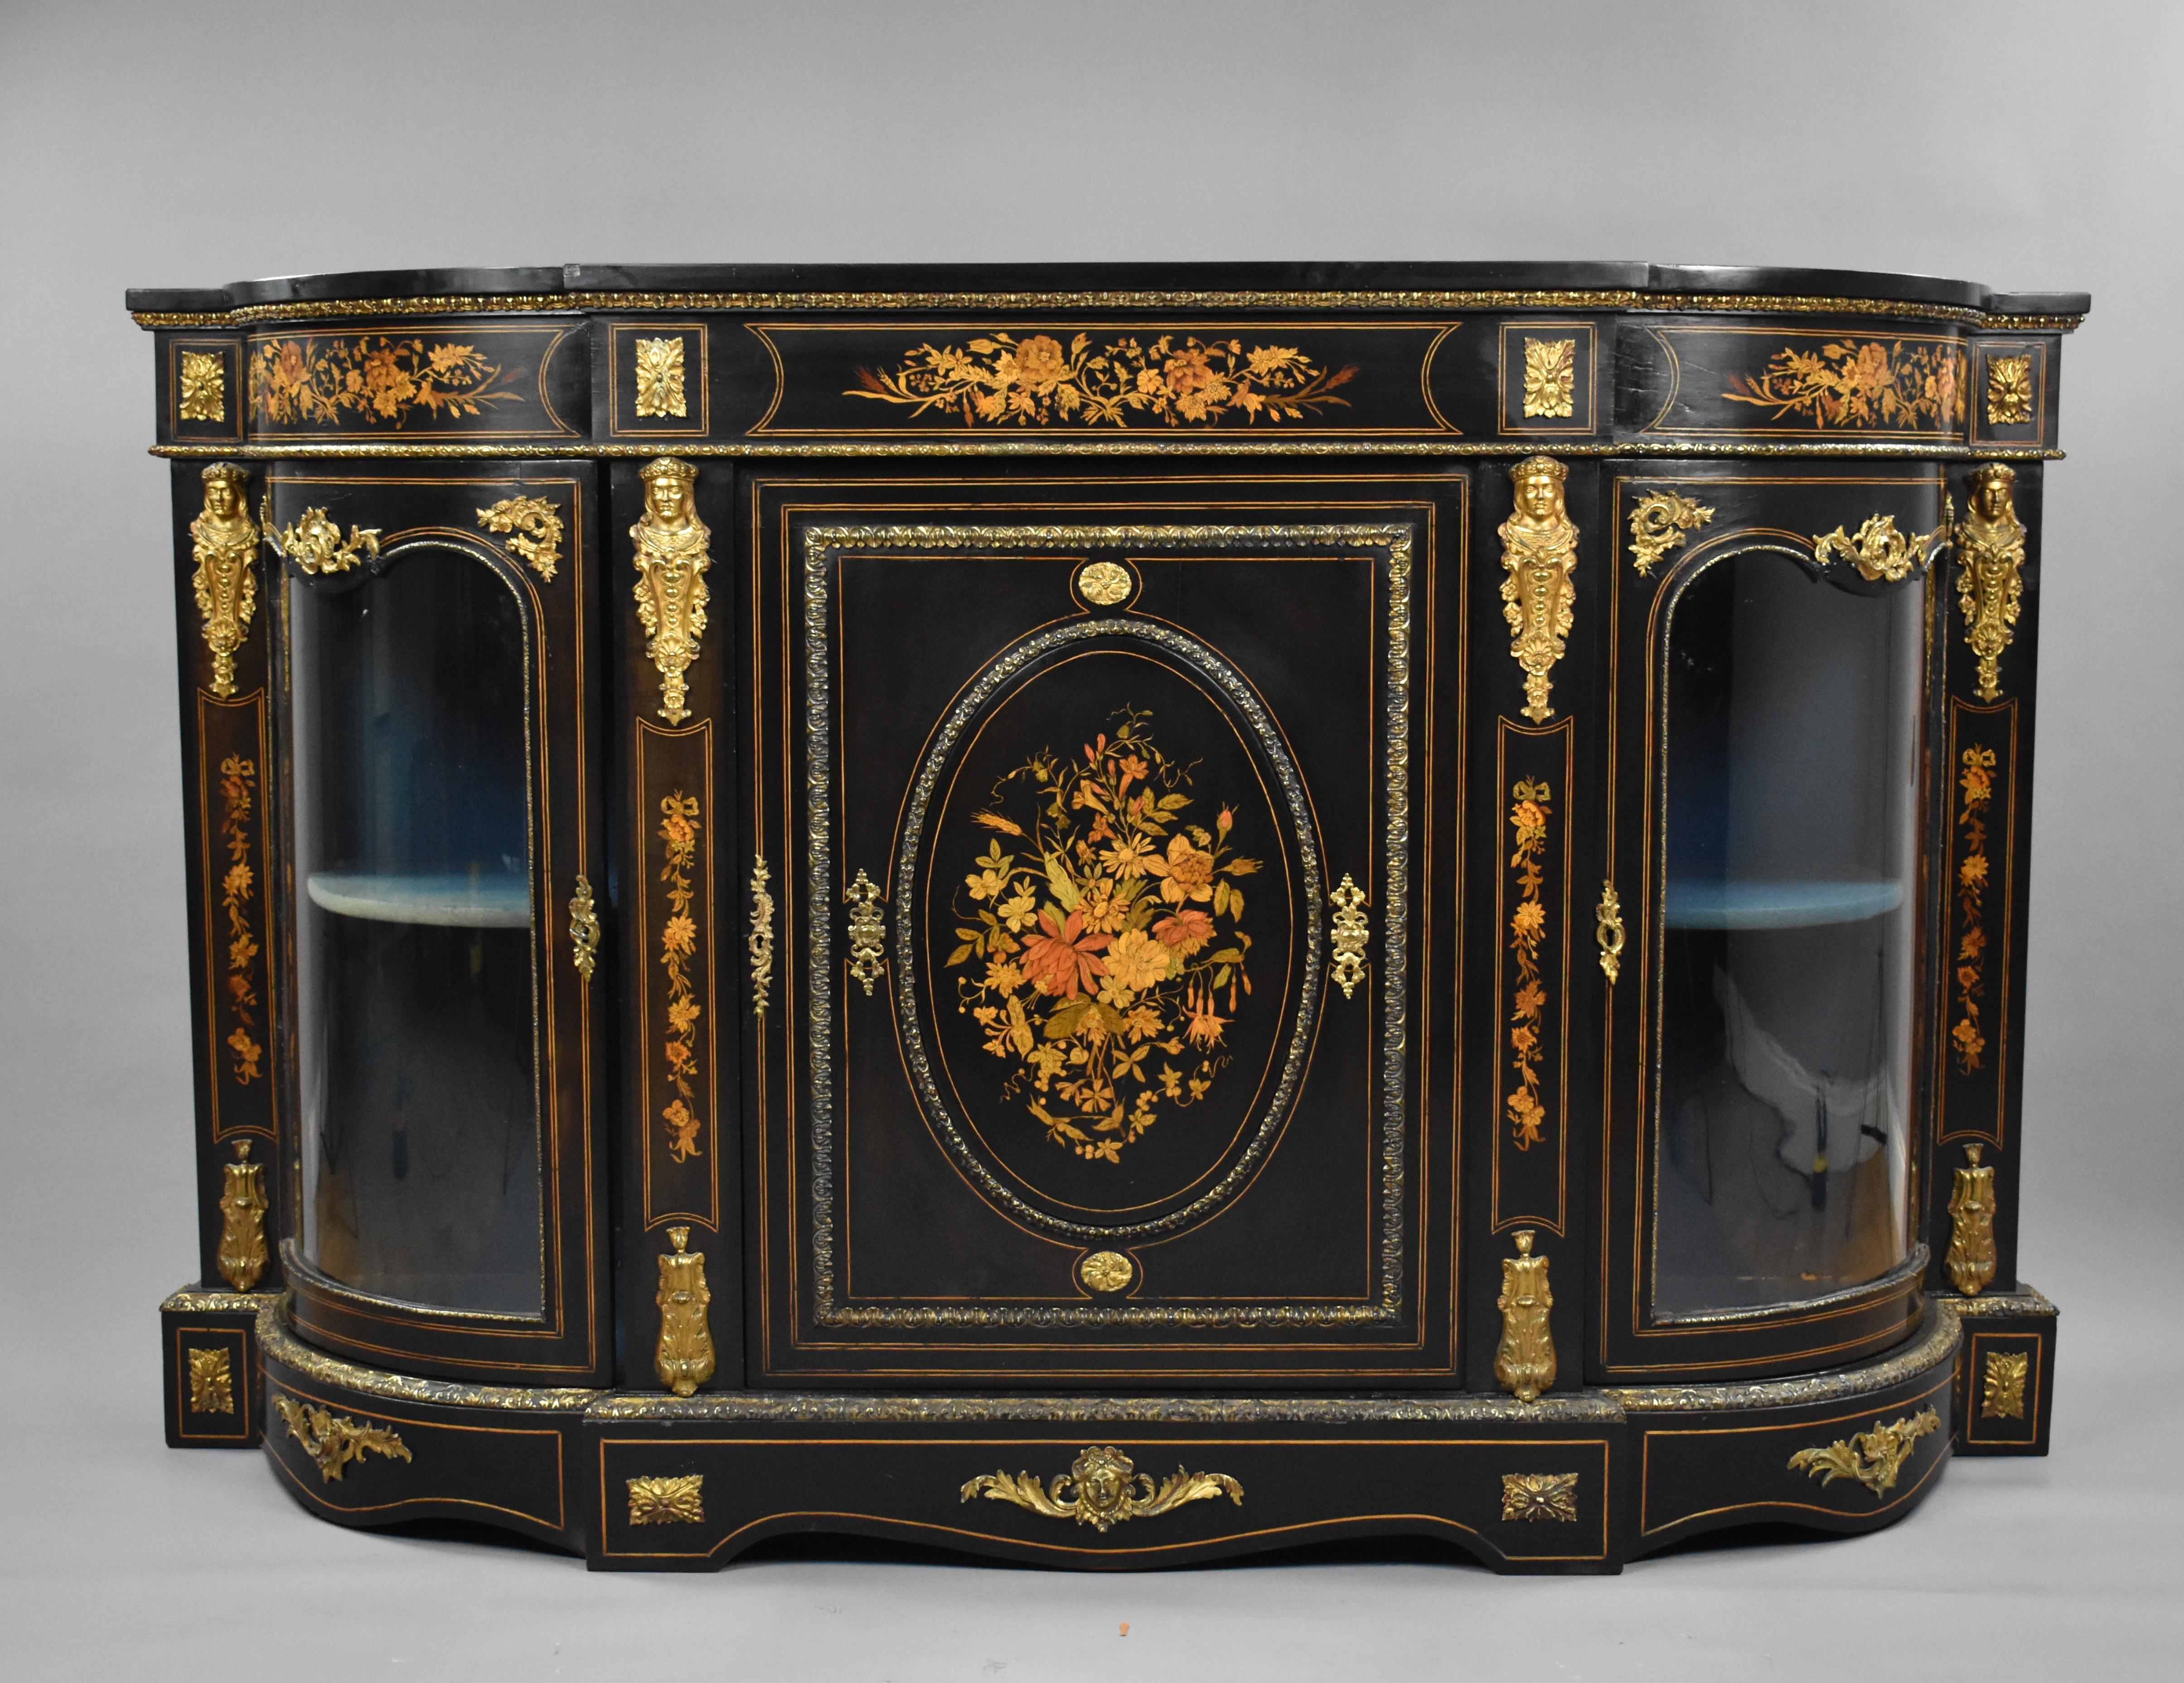 A good quality 19th century English Victorian ebonised and marquetry credenza, profusely inlaid with floral marquetry throughout and decorated with ormolu mounts, the credenza has two bowed glass doors flanking a central cupboard, above a shaped